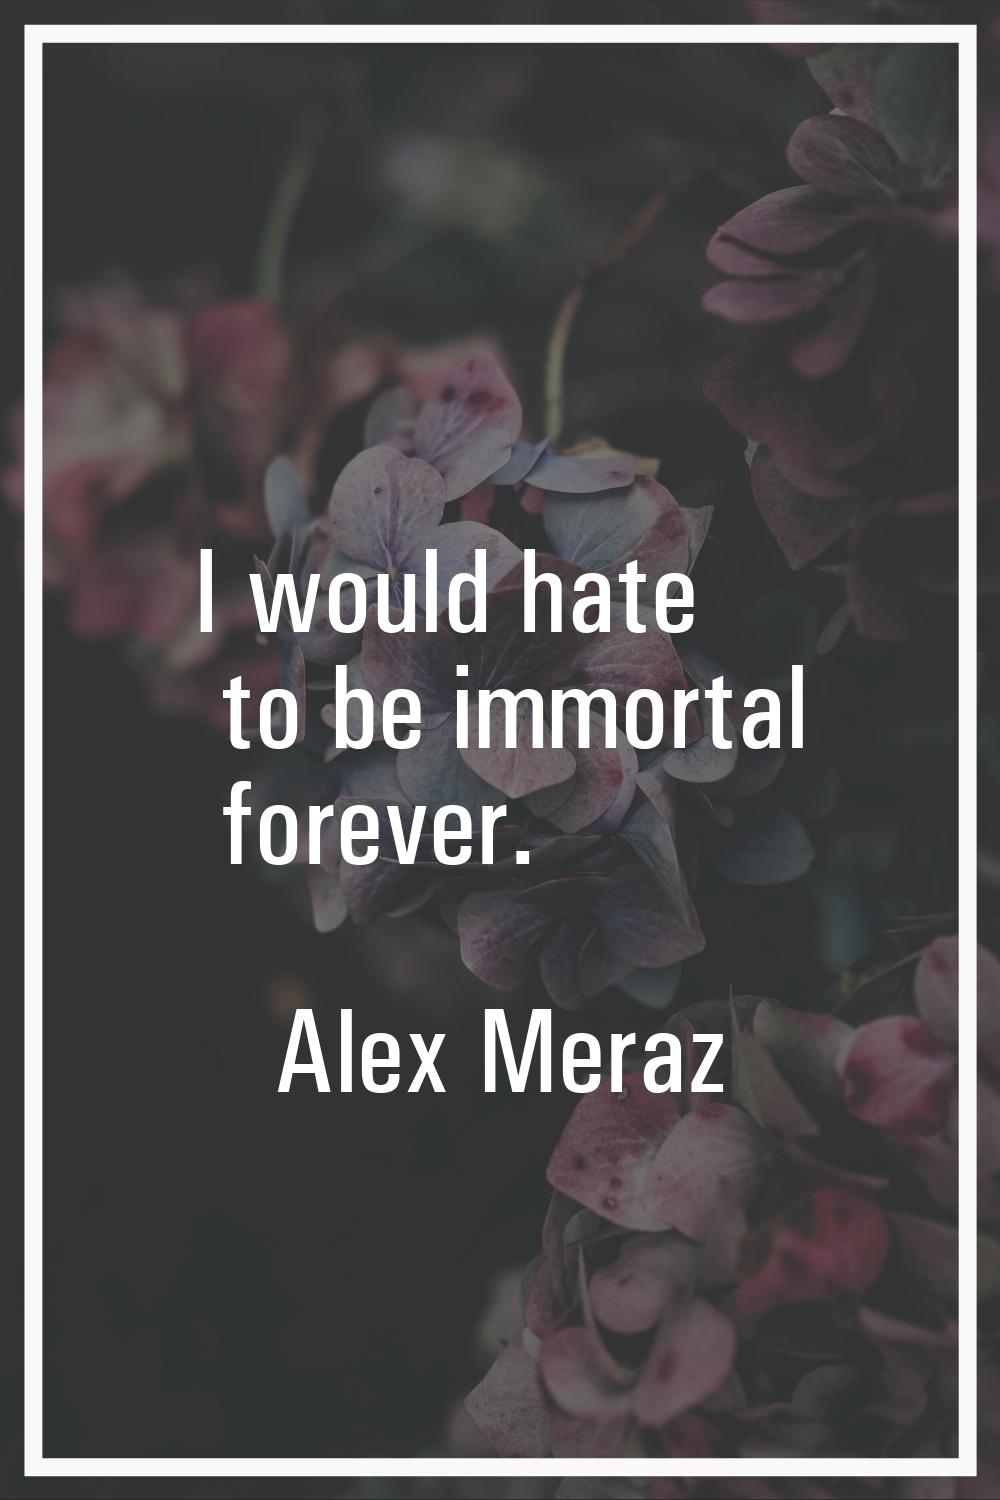 I would hate to be immortal forever.